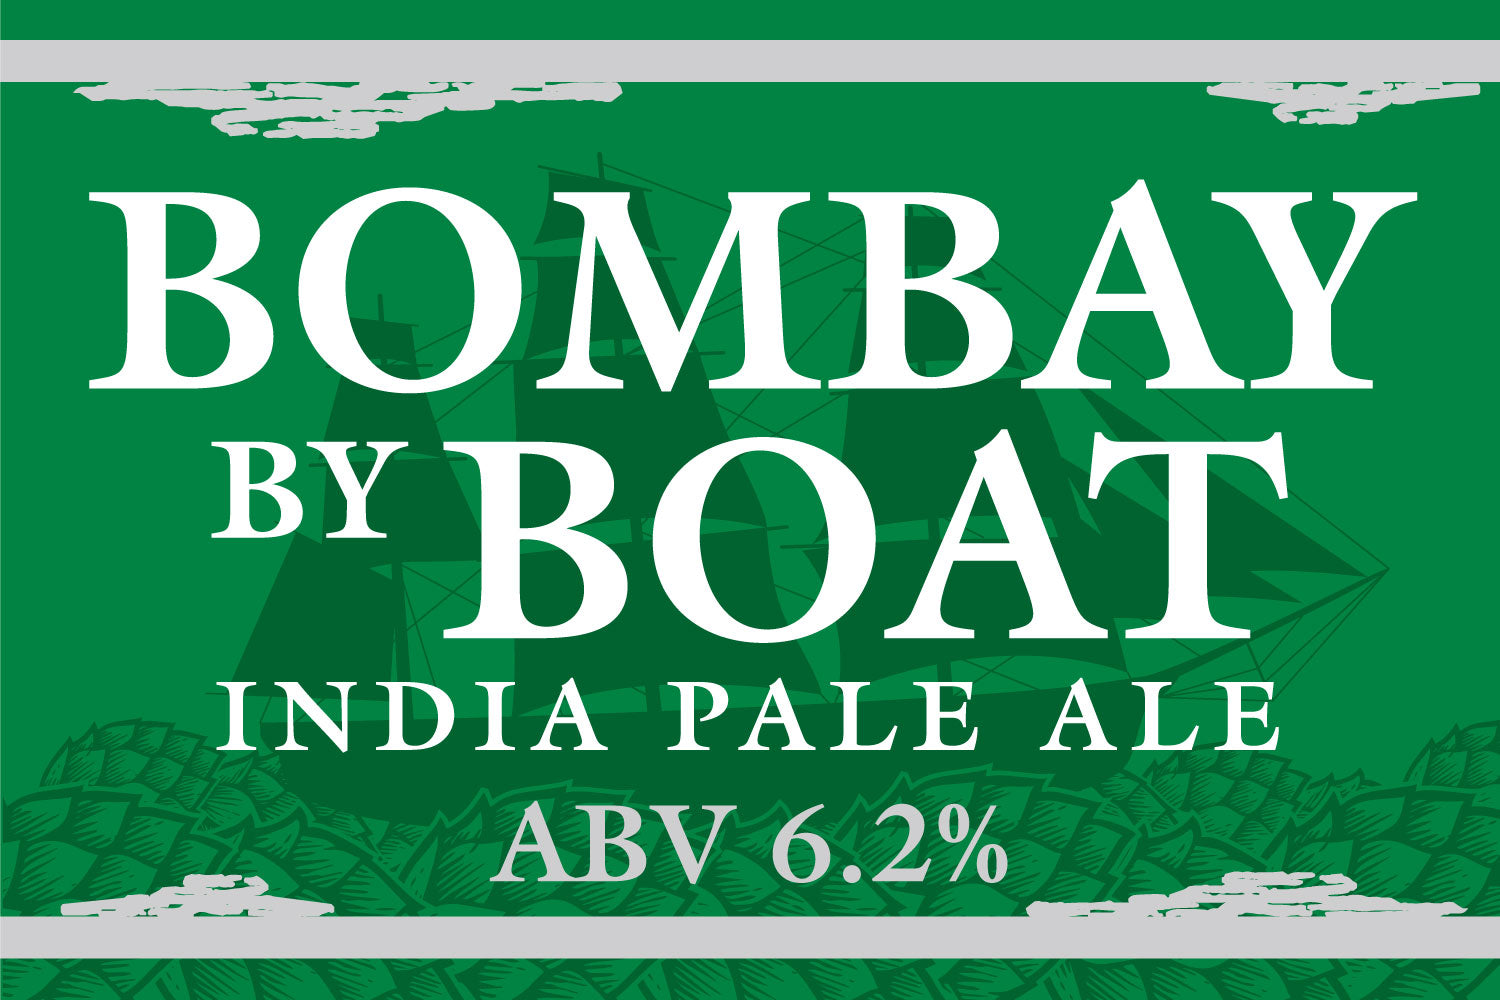 Bombay By Boat IPA beer sign